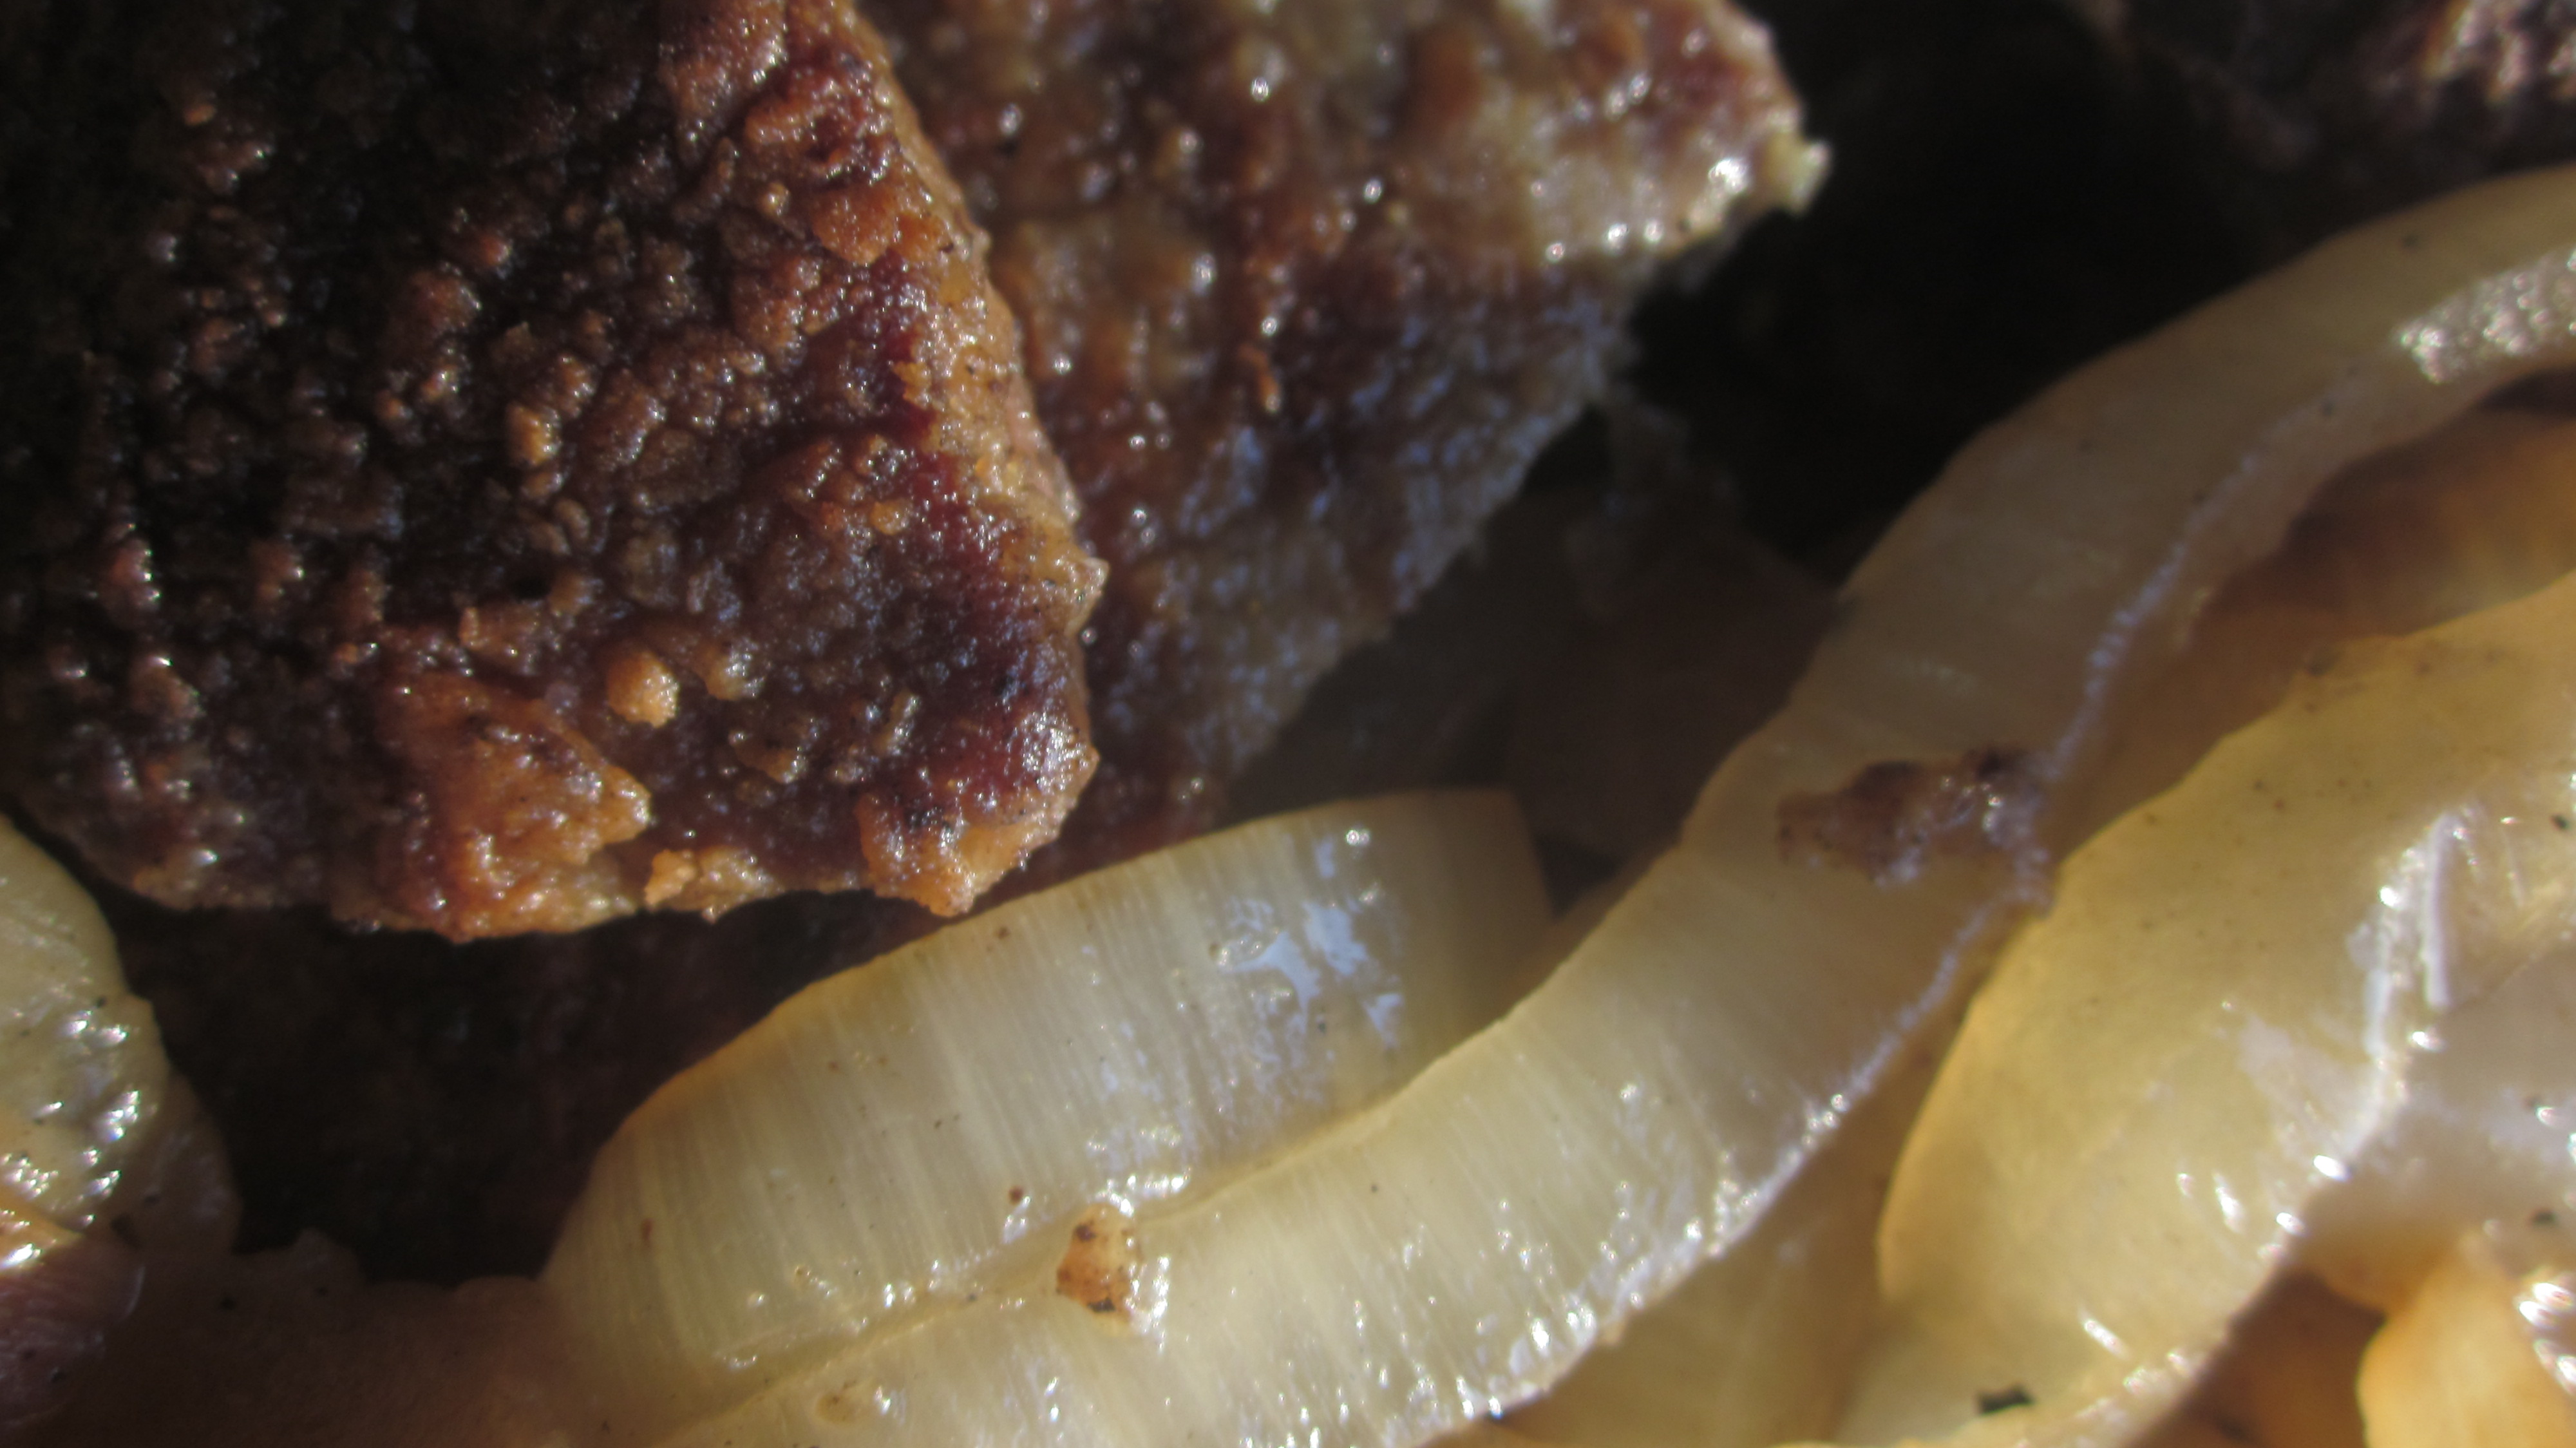 Liver and onions recipe: the secret that makes it irresistible!